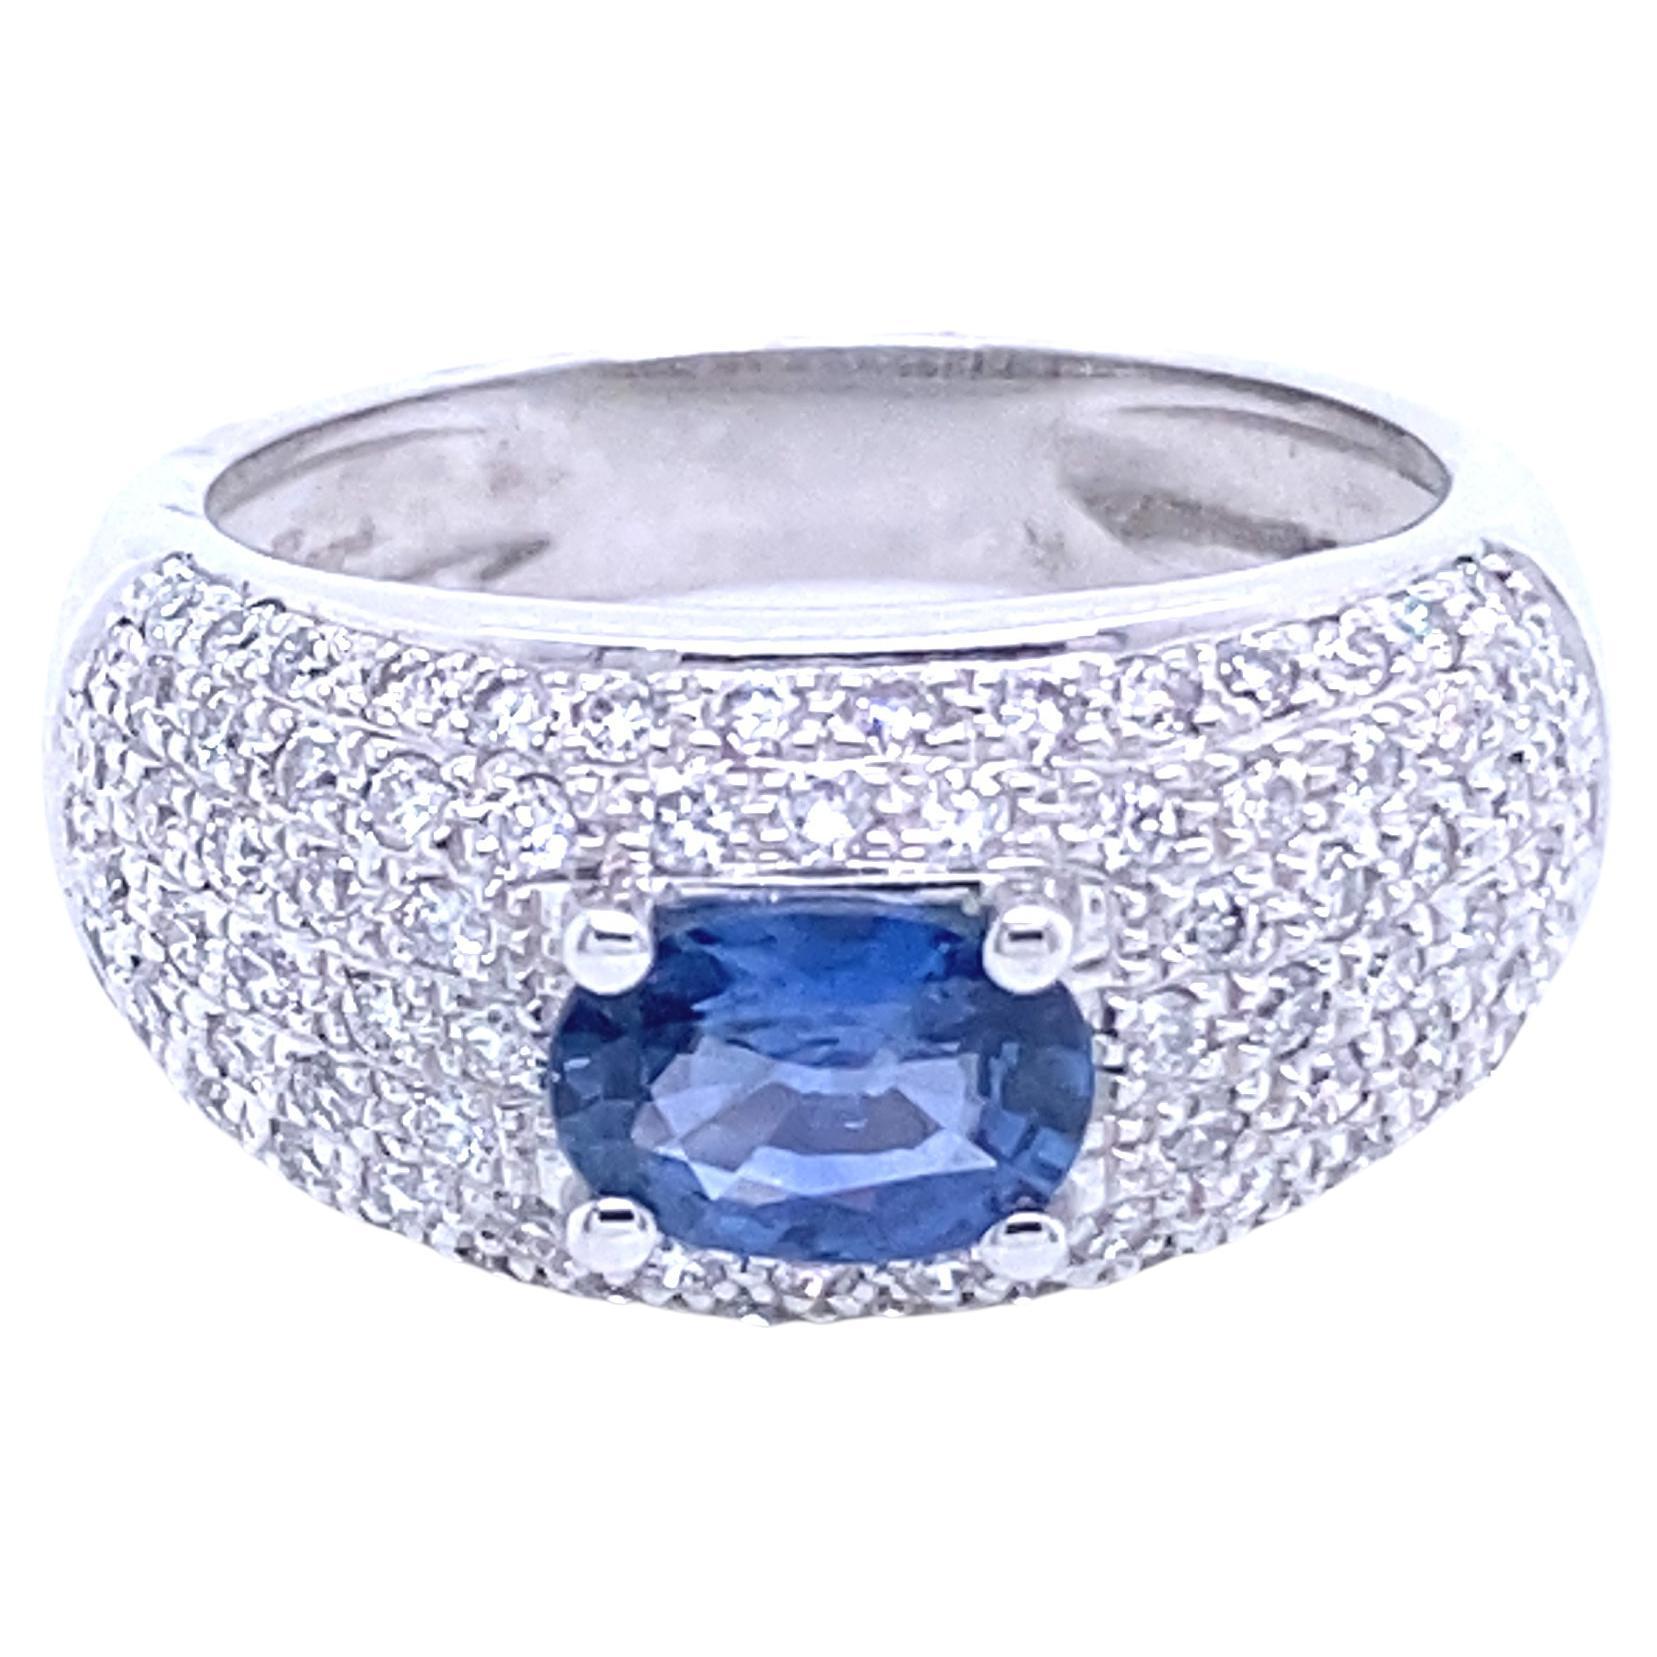 Discover this marvelous 18-carat white gold cocktail ring, set with a sparkling sapphire and diamonds, from the French collection of Mesure et Art du Temps. This ring is an exceptional piece, combining elegance, sophistication and a hint of